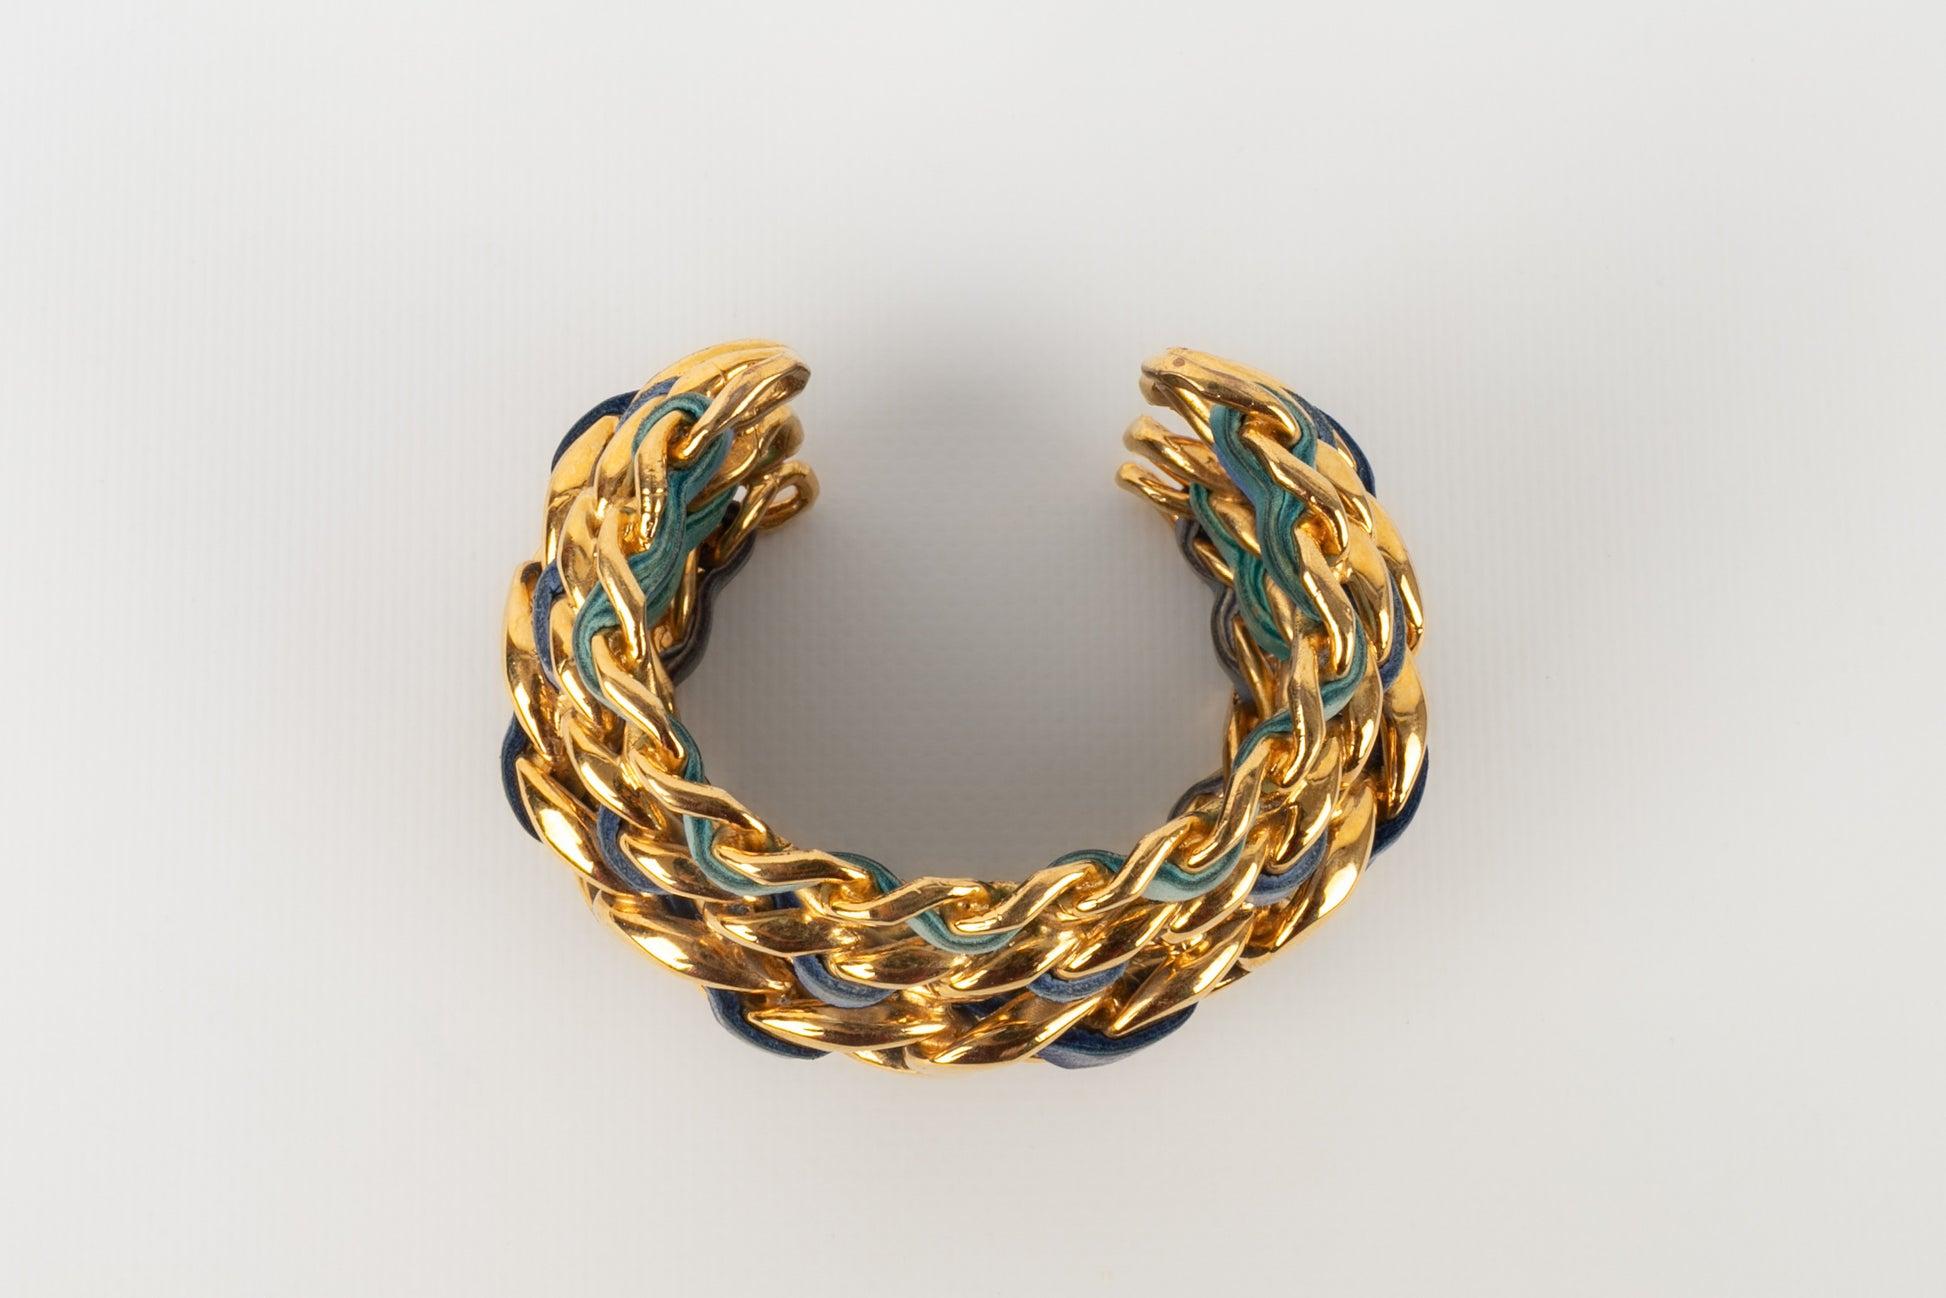 Chanel Cuff Bracelet in Golden Metal Interlaced with Blue Tone Leather, 1991 In Good Condition For Sale In SAINT-OUEN-SUR-SEINE, FR